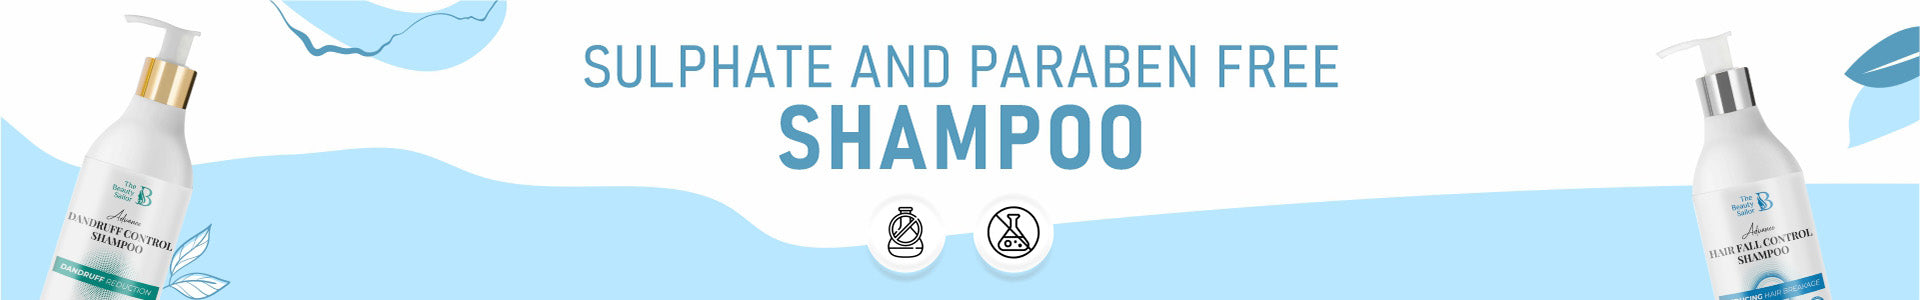 Sulphate and paraben-free shampoos by The Beauty Sailor for healthy hair